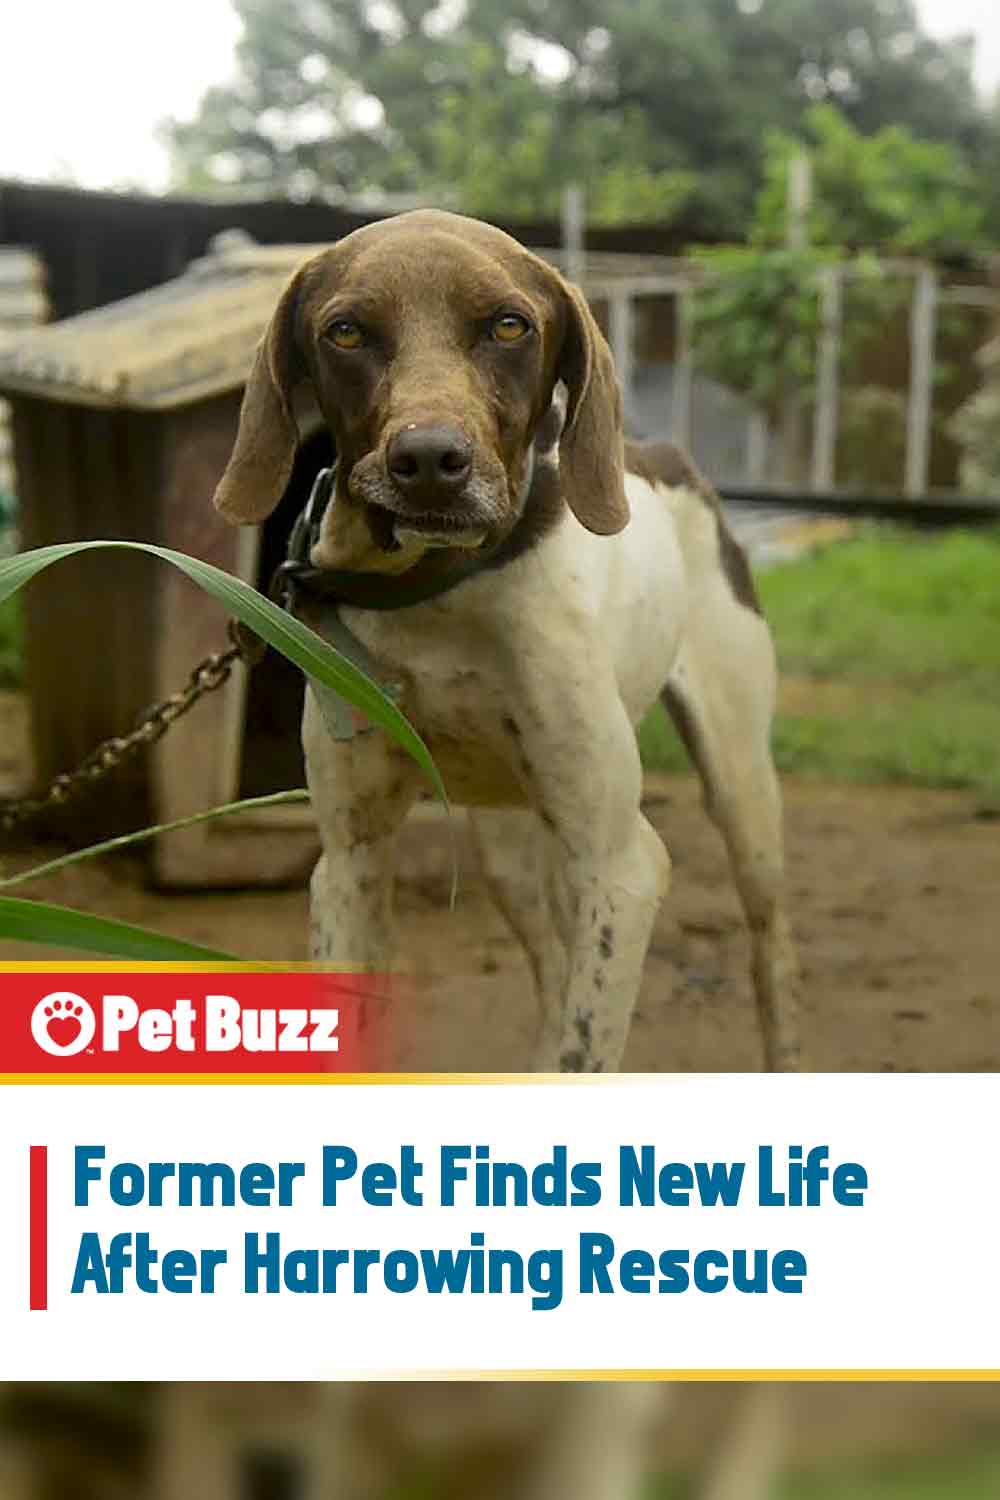 Former Pet Finds New Life After Harrowing Rescue